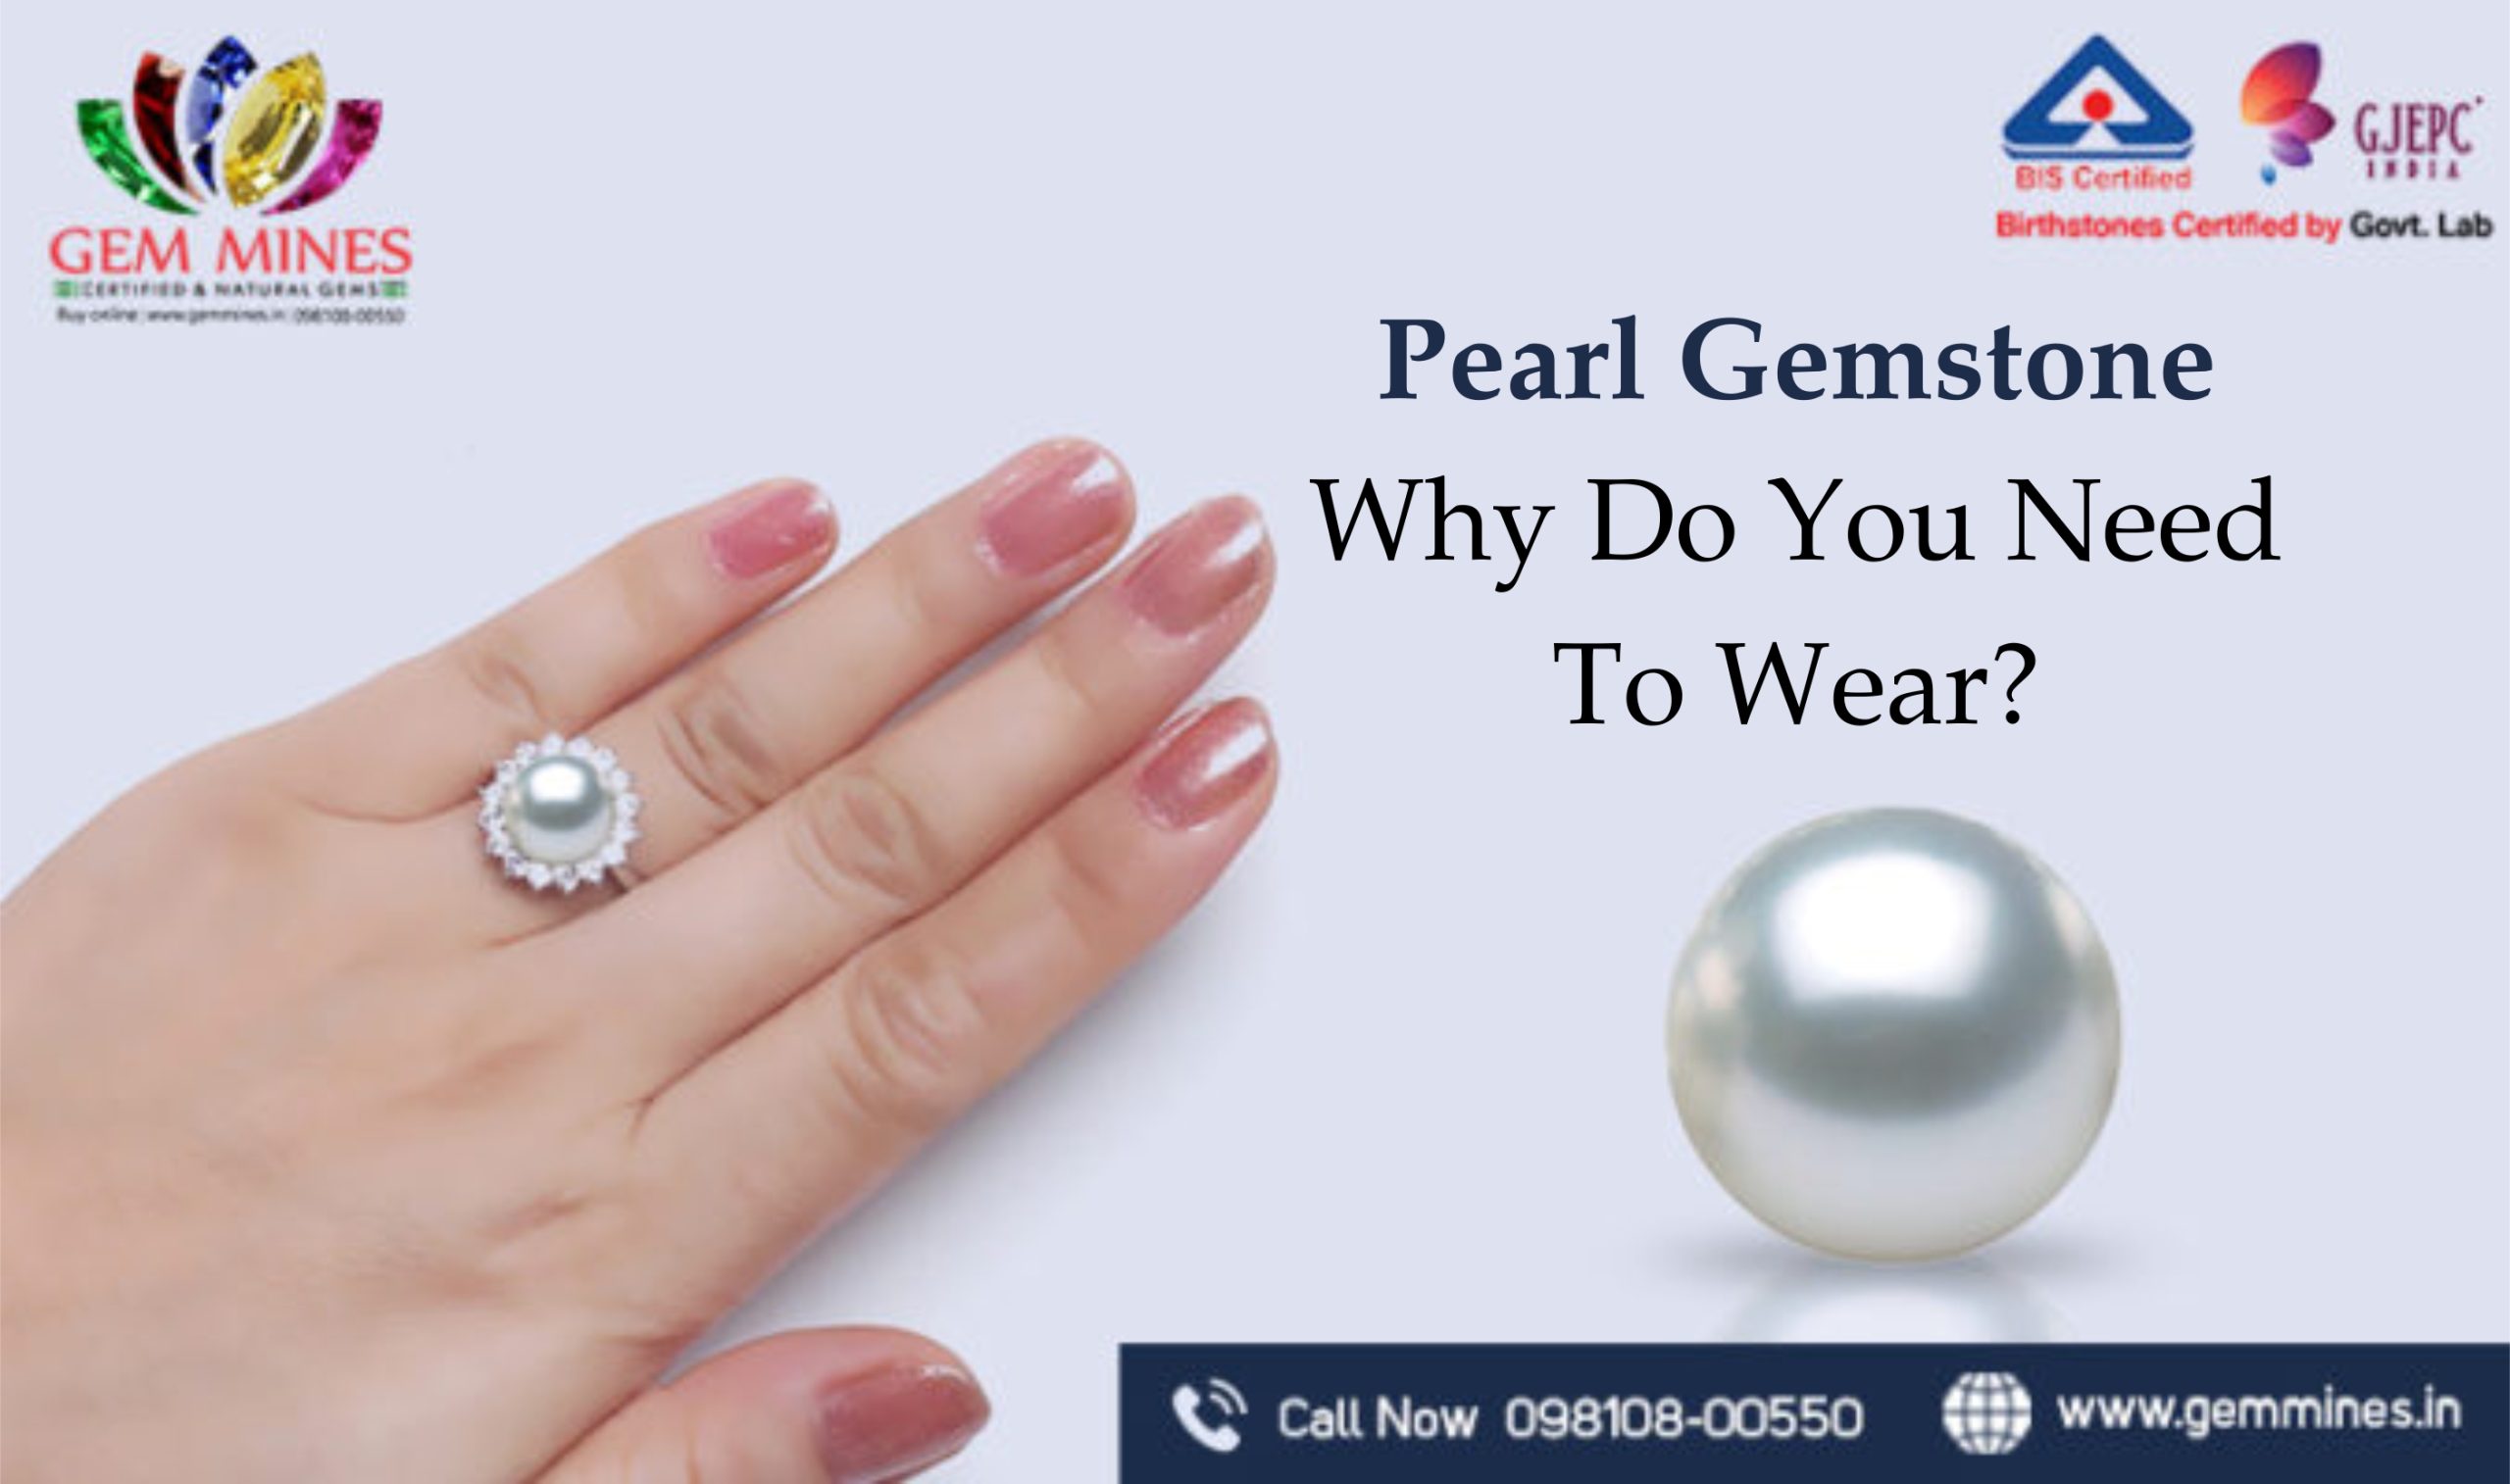 Pearl Gemstone: Why Do You Need To Wear?